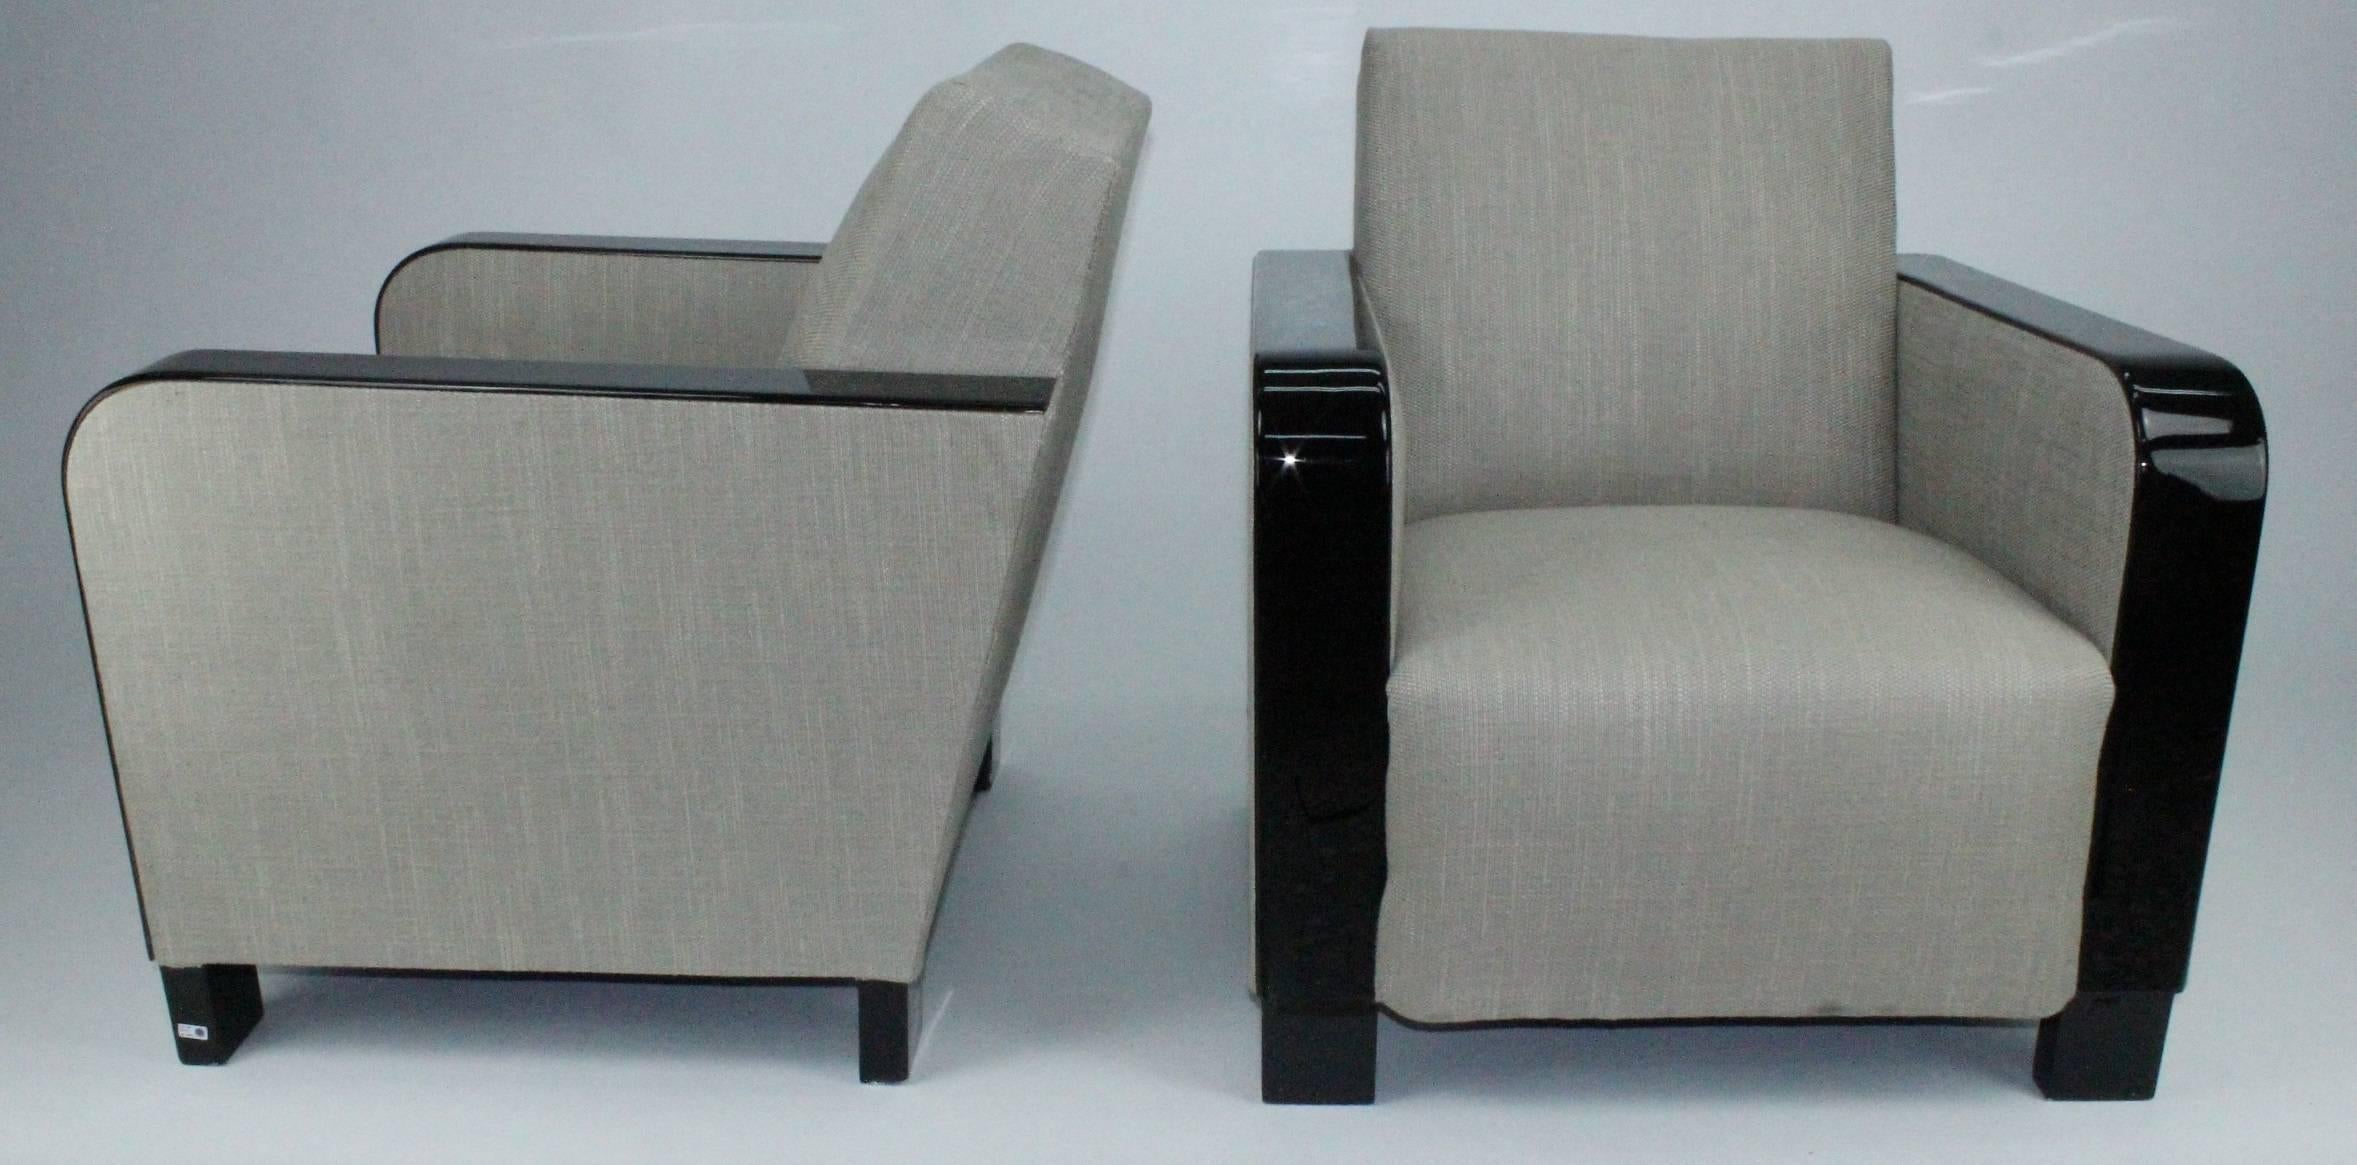 A pair of very stylish and comfortable Art Deco club chairs. Swedish Modern, 1930s. Black lacquered and reupholstered. Restored, with some tiny marks and small scratches.